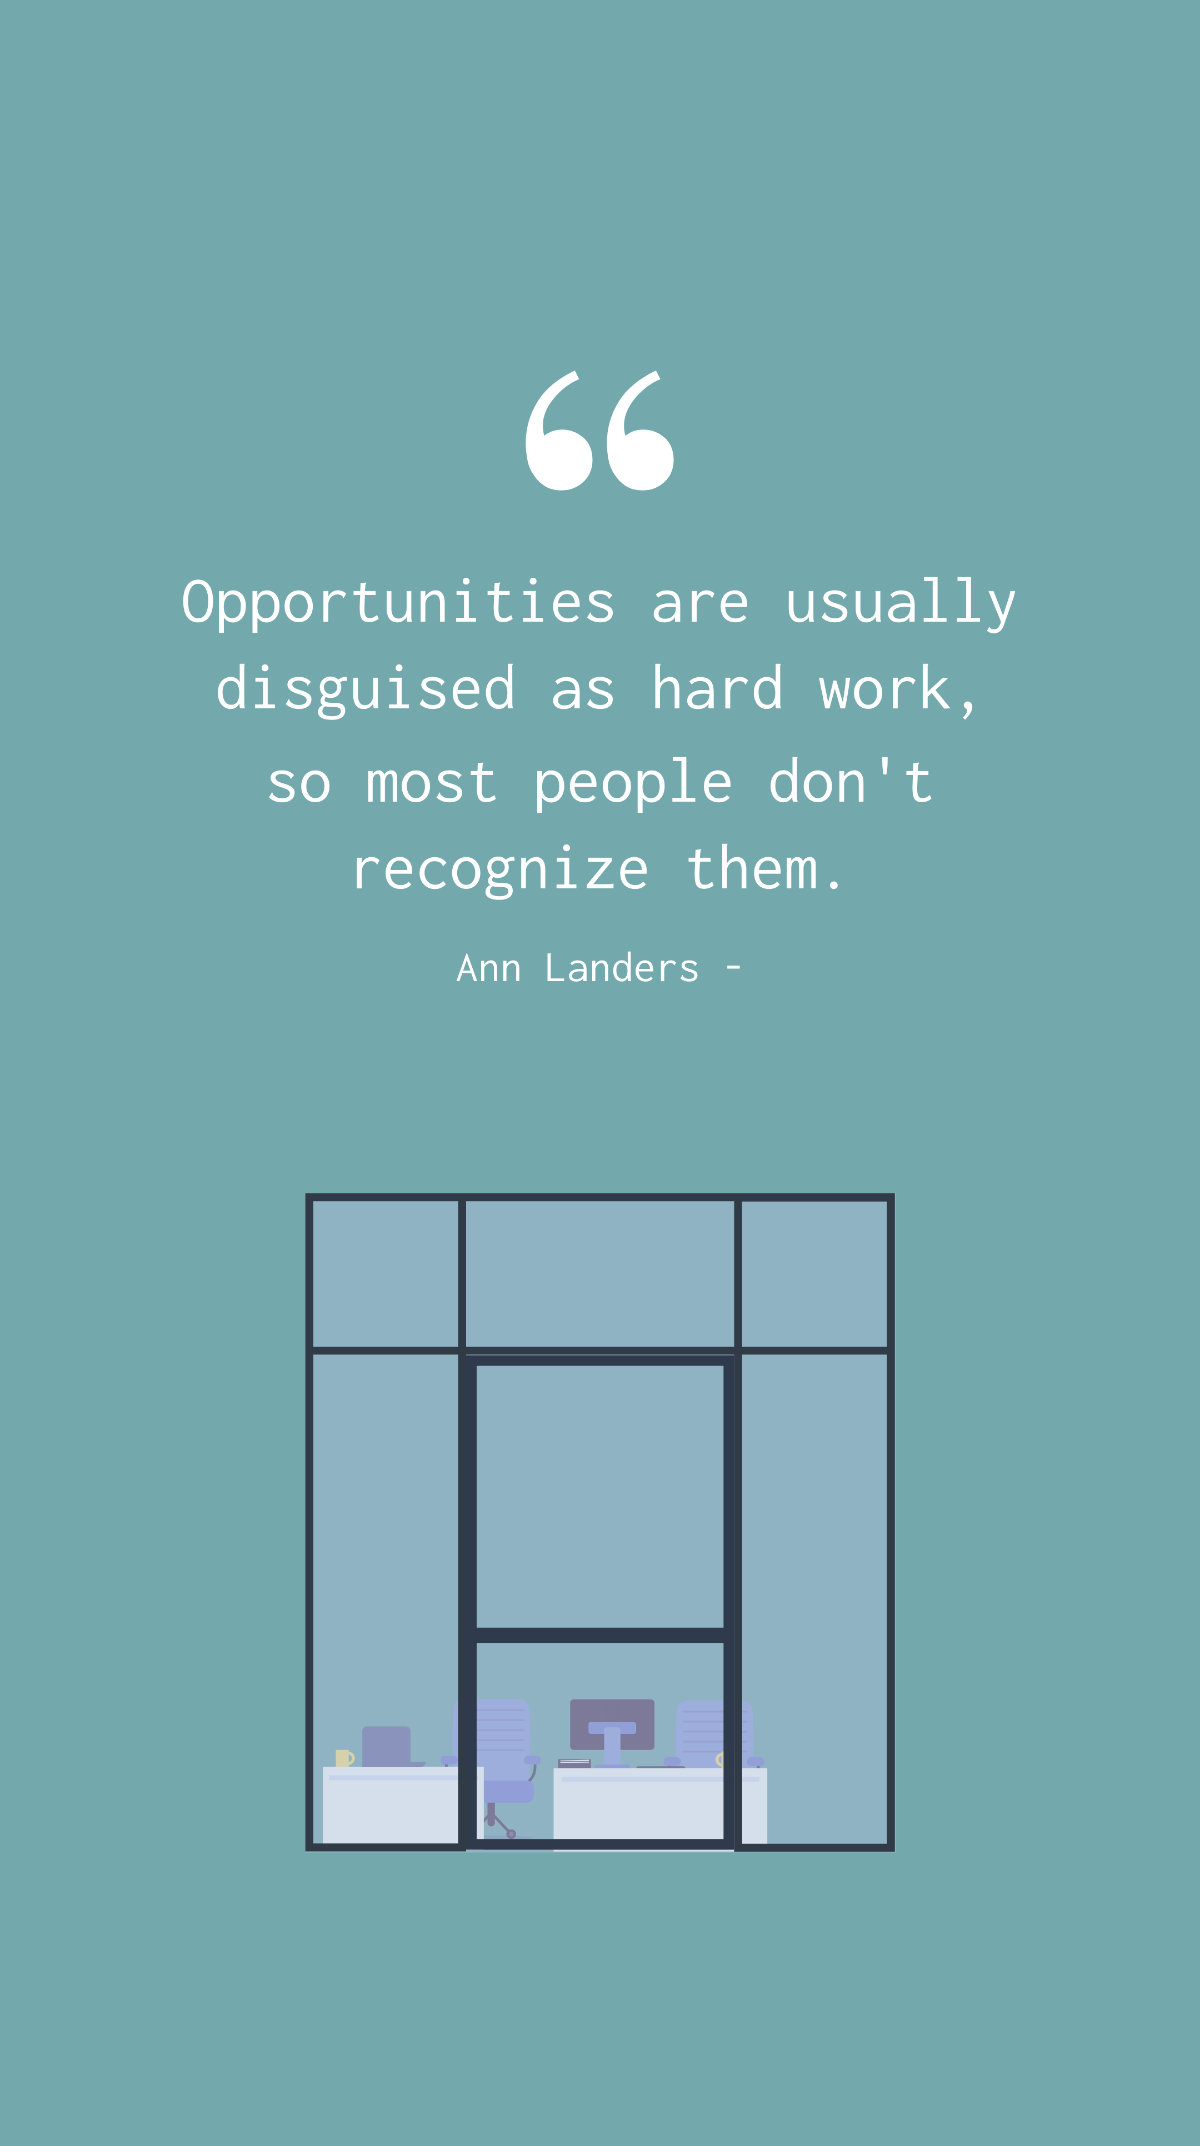 Ann Landers - Opportunities are usually disguised as hard work, so most people don't recognize them. Template